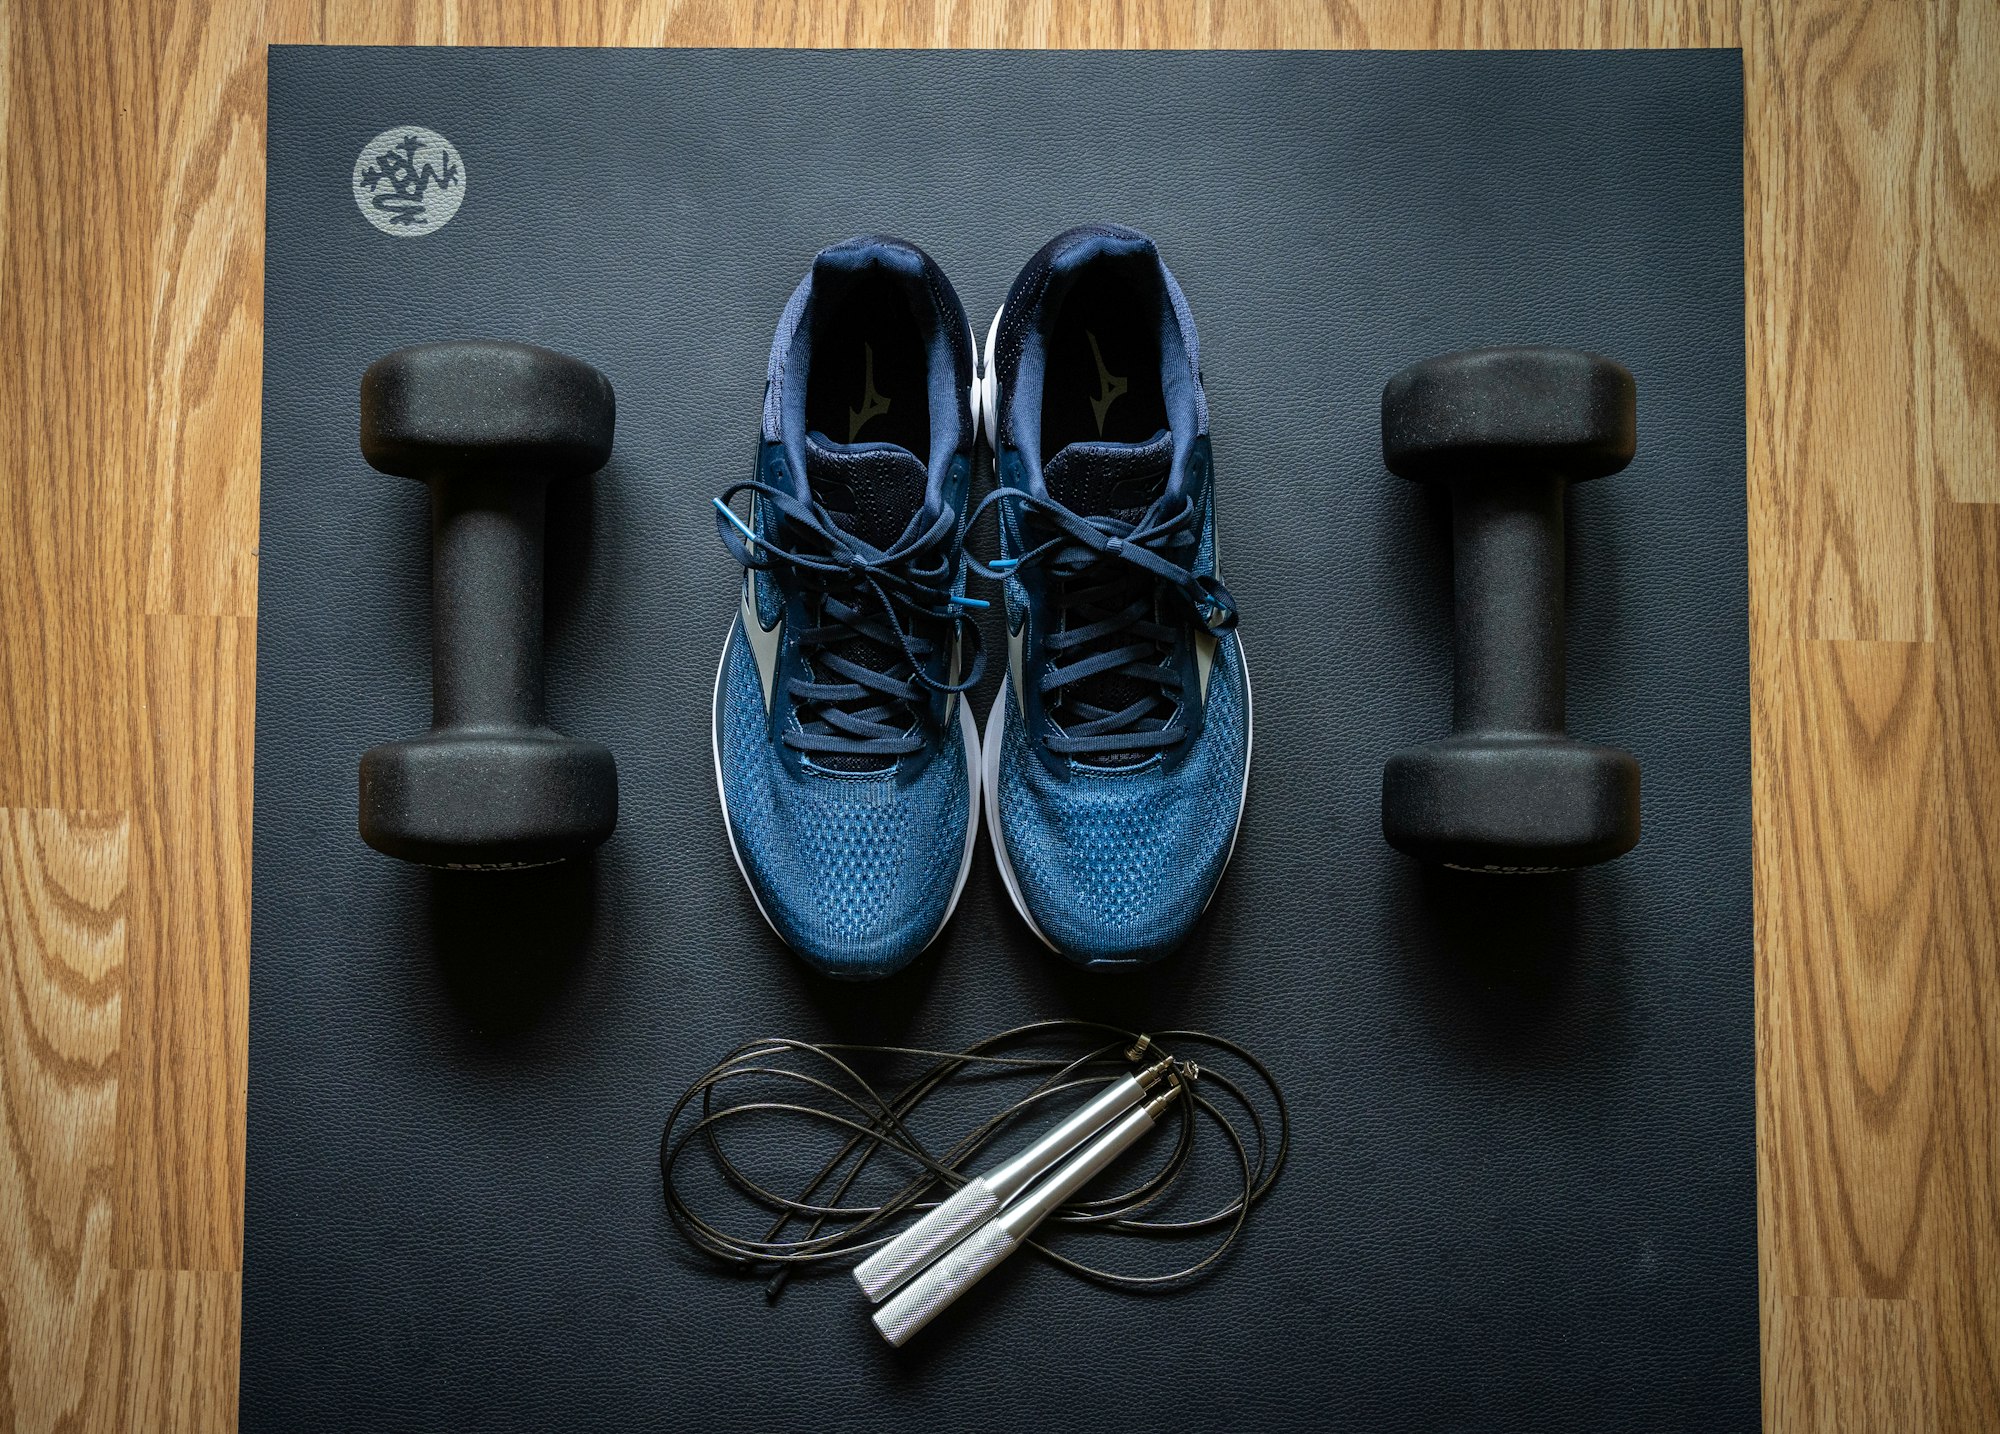 Home gym equipment by ProsourceFit dumbbells and Mizuno sneakers